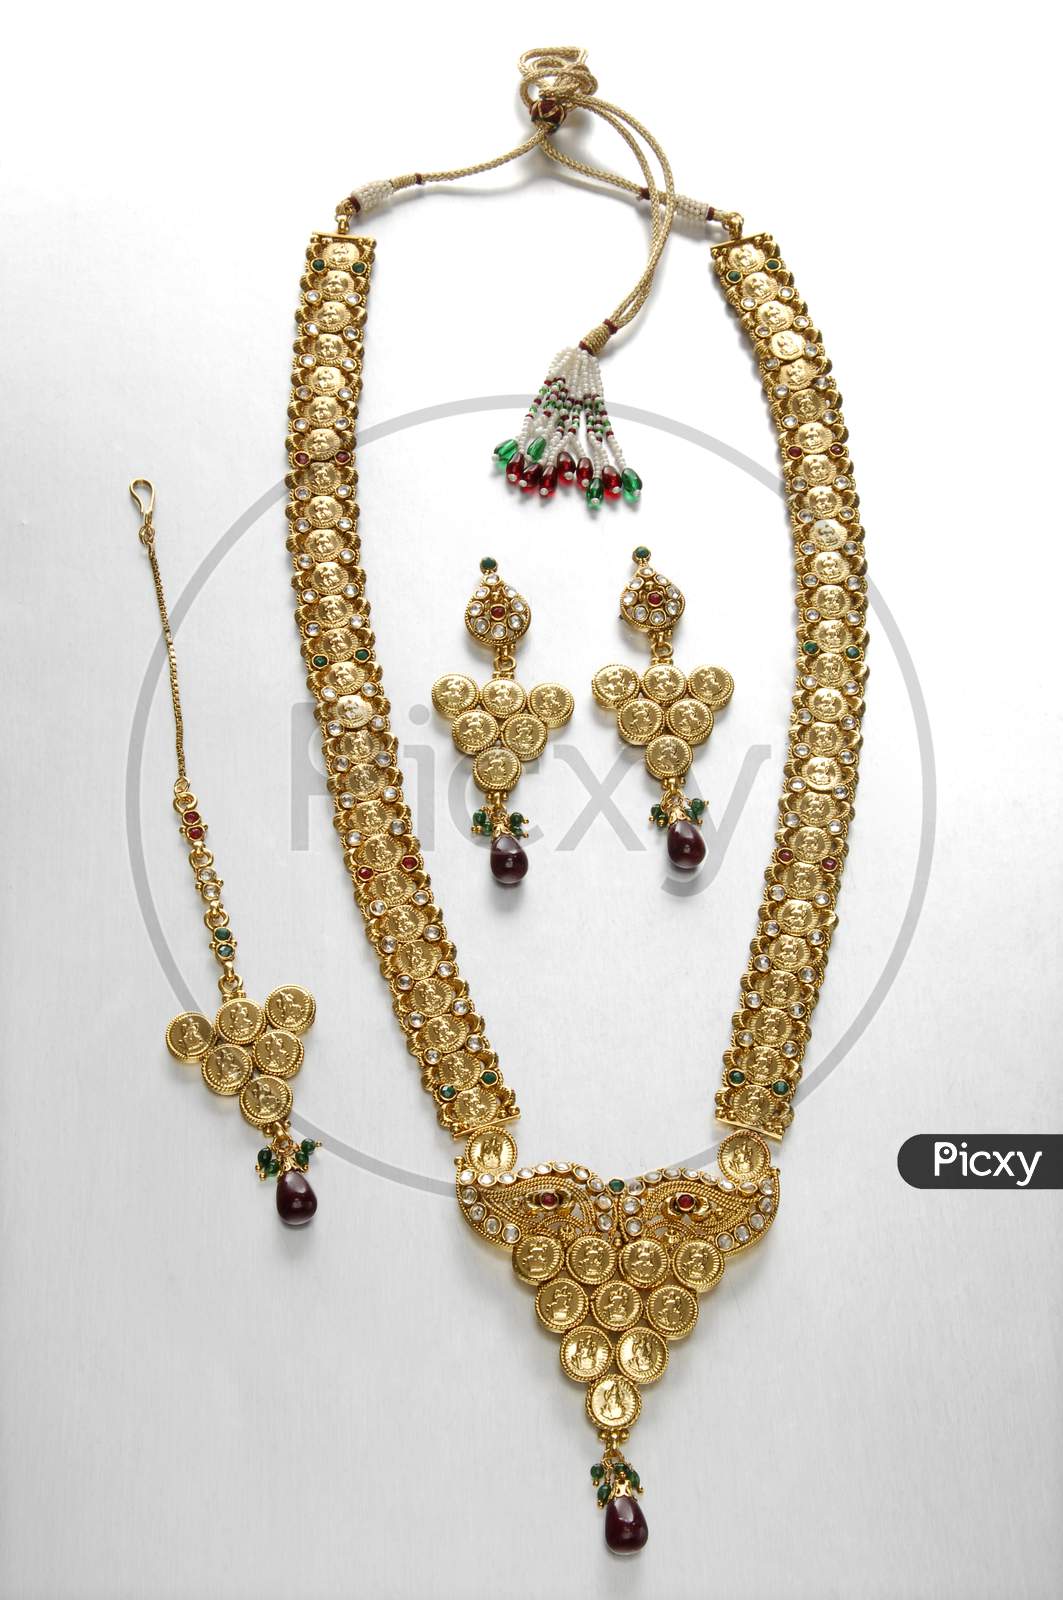 A Necklace set with matching earrings